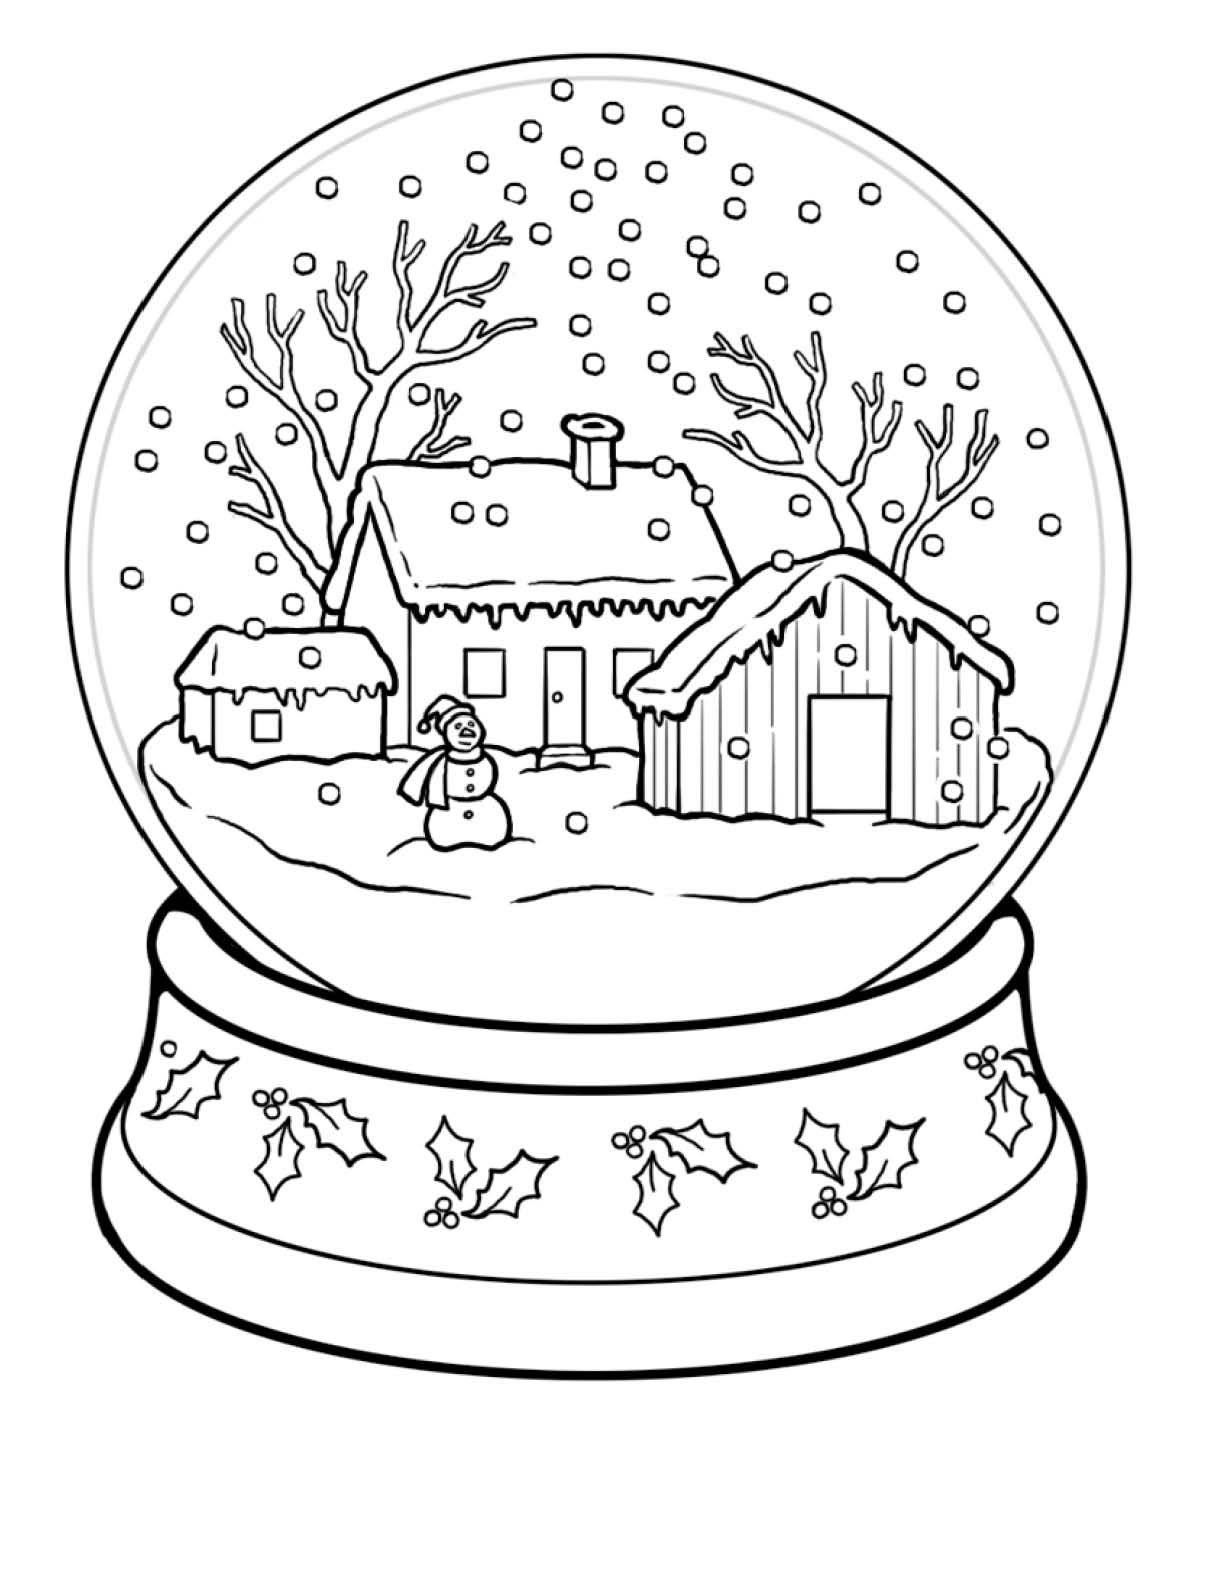 Winter Coloring Pages For Adults - Coloring Home